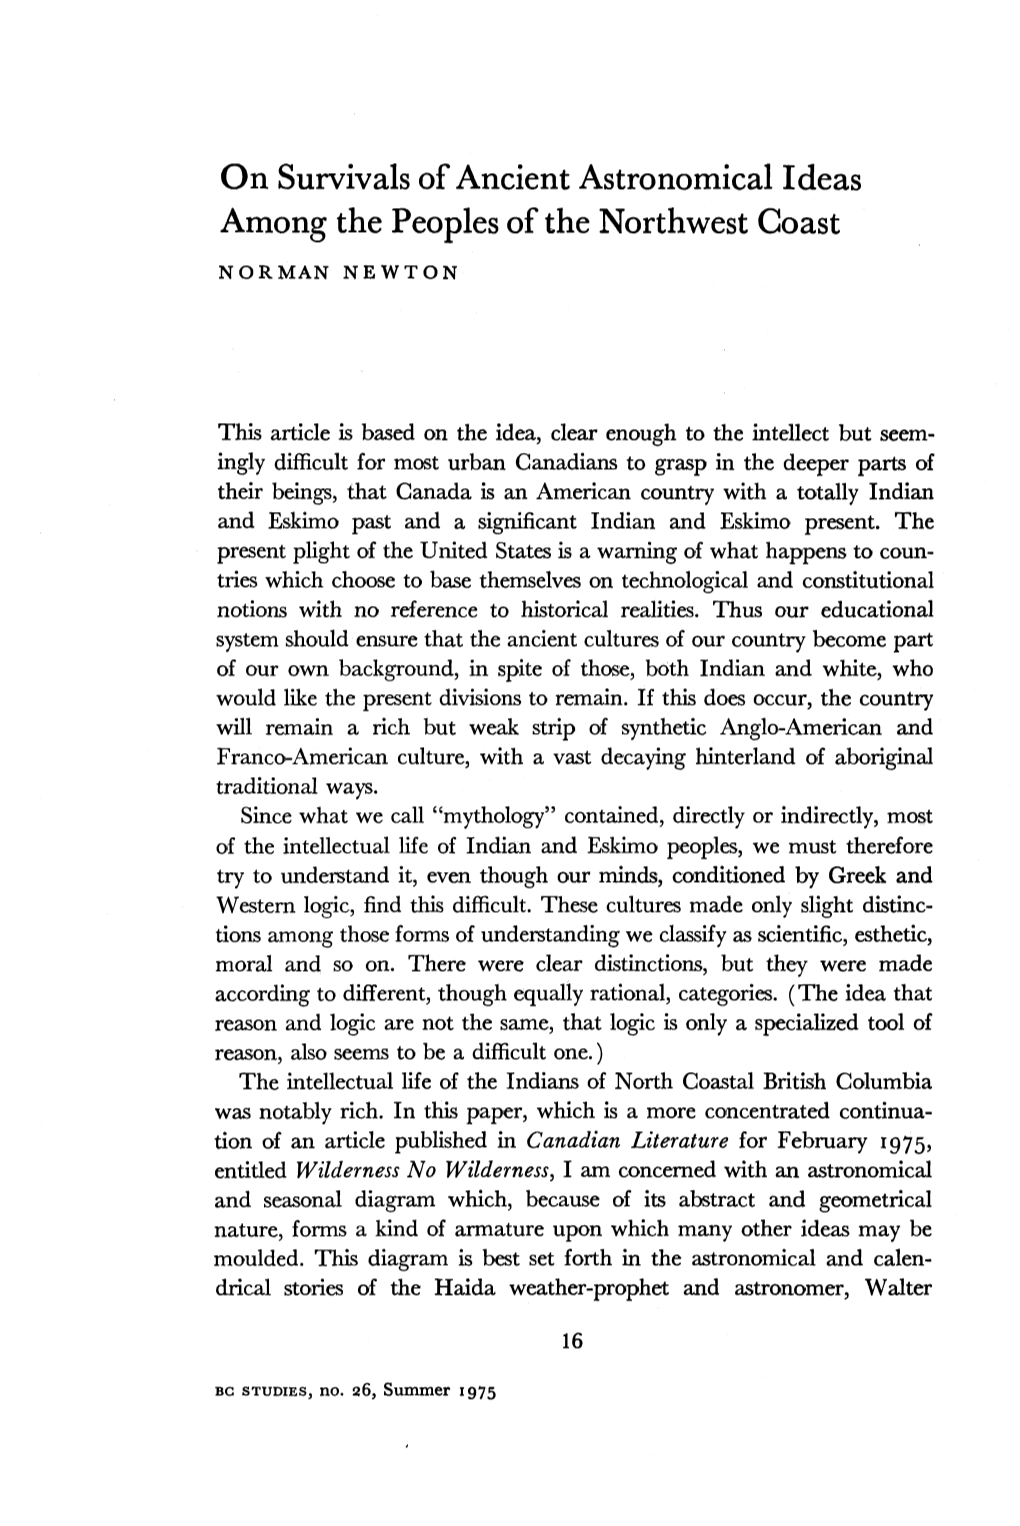 On Survivals of Ancient Astronomical Ideas Among the Peoples of the Northwest Coast NORMAN NEWTON